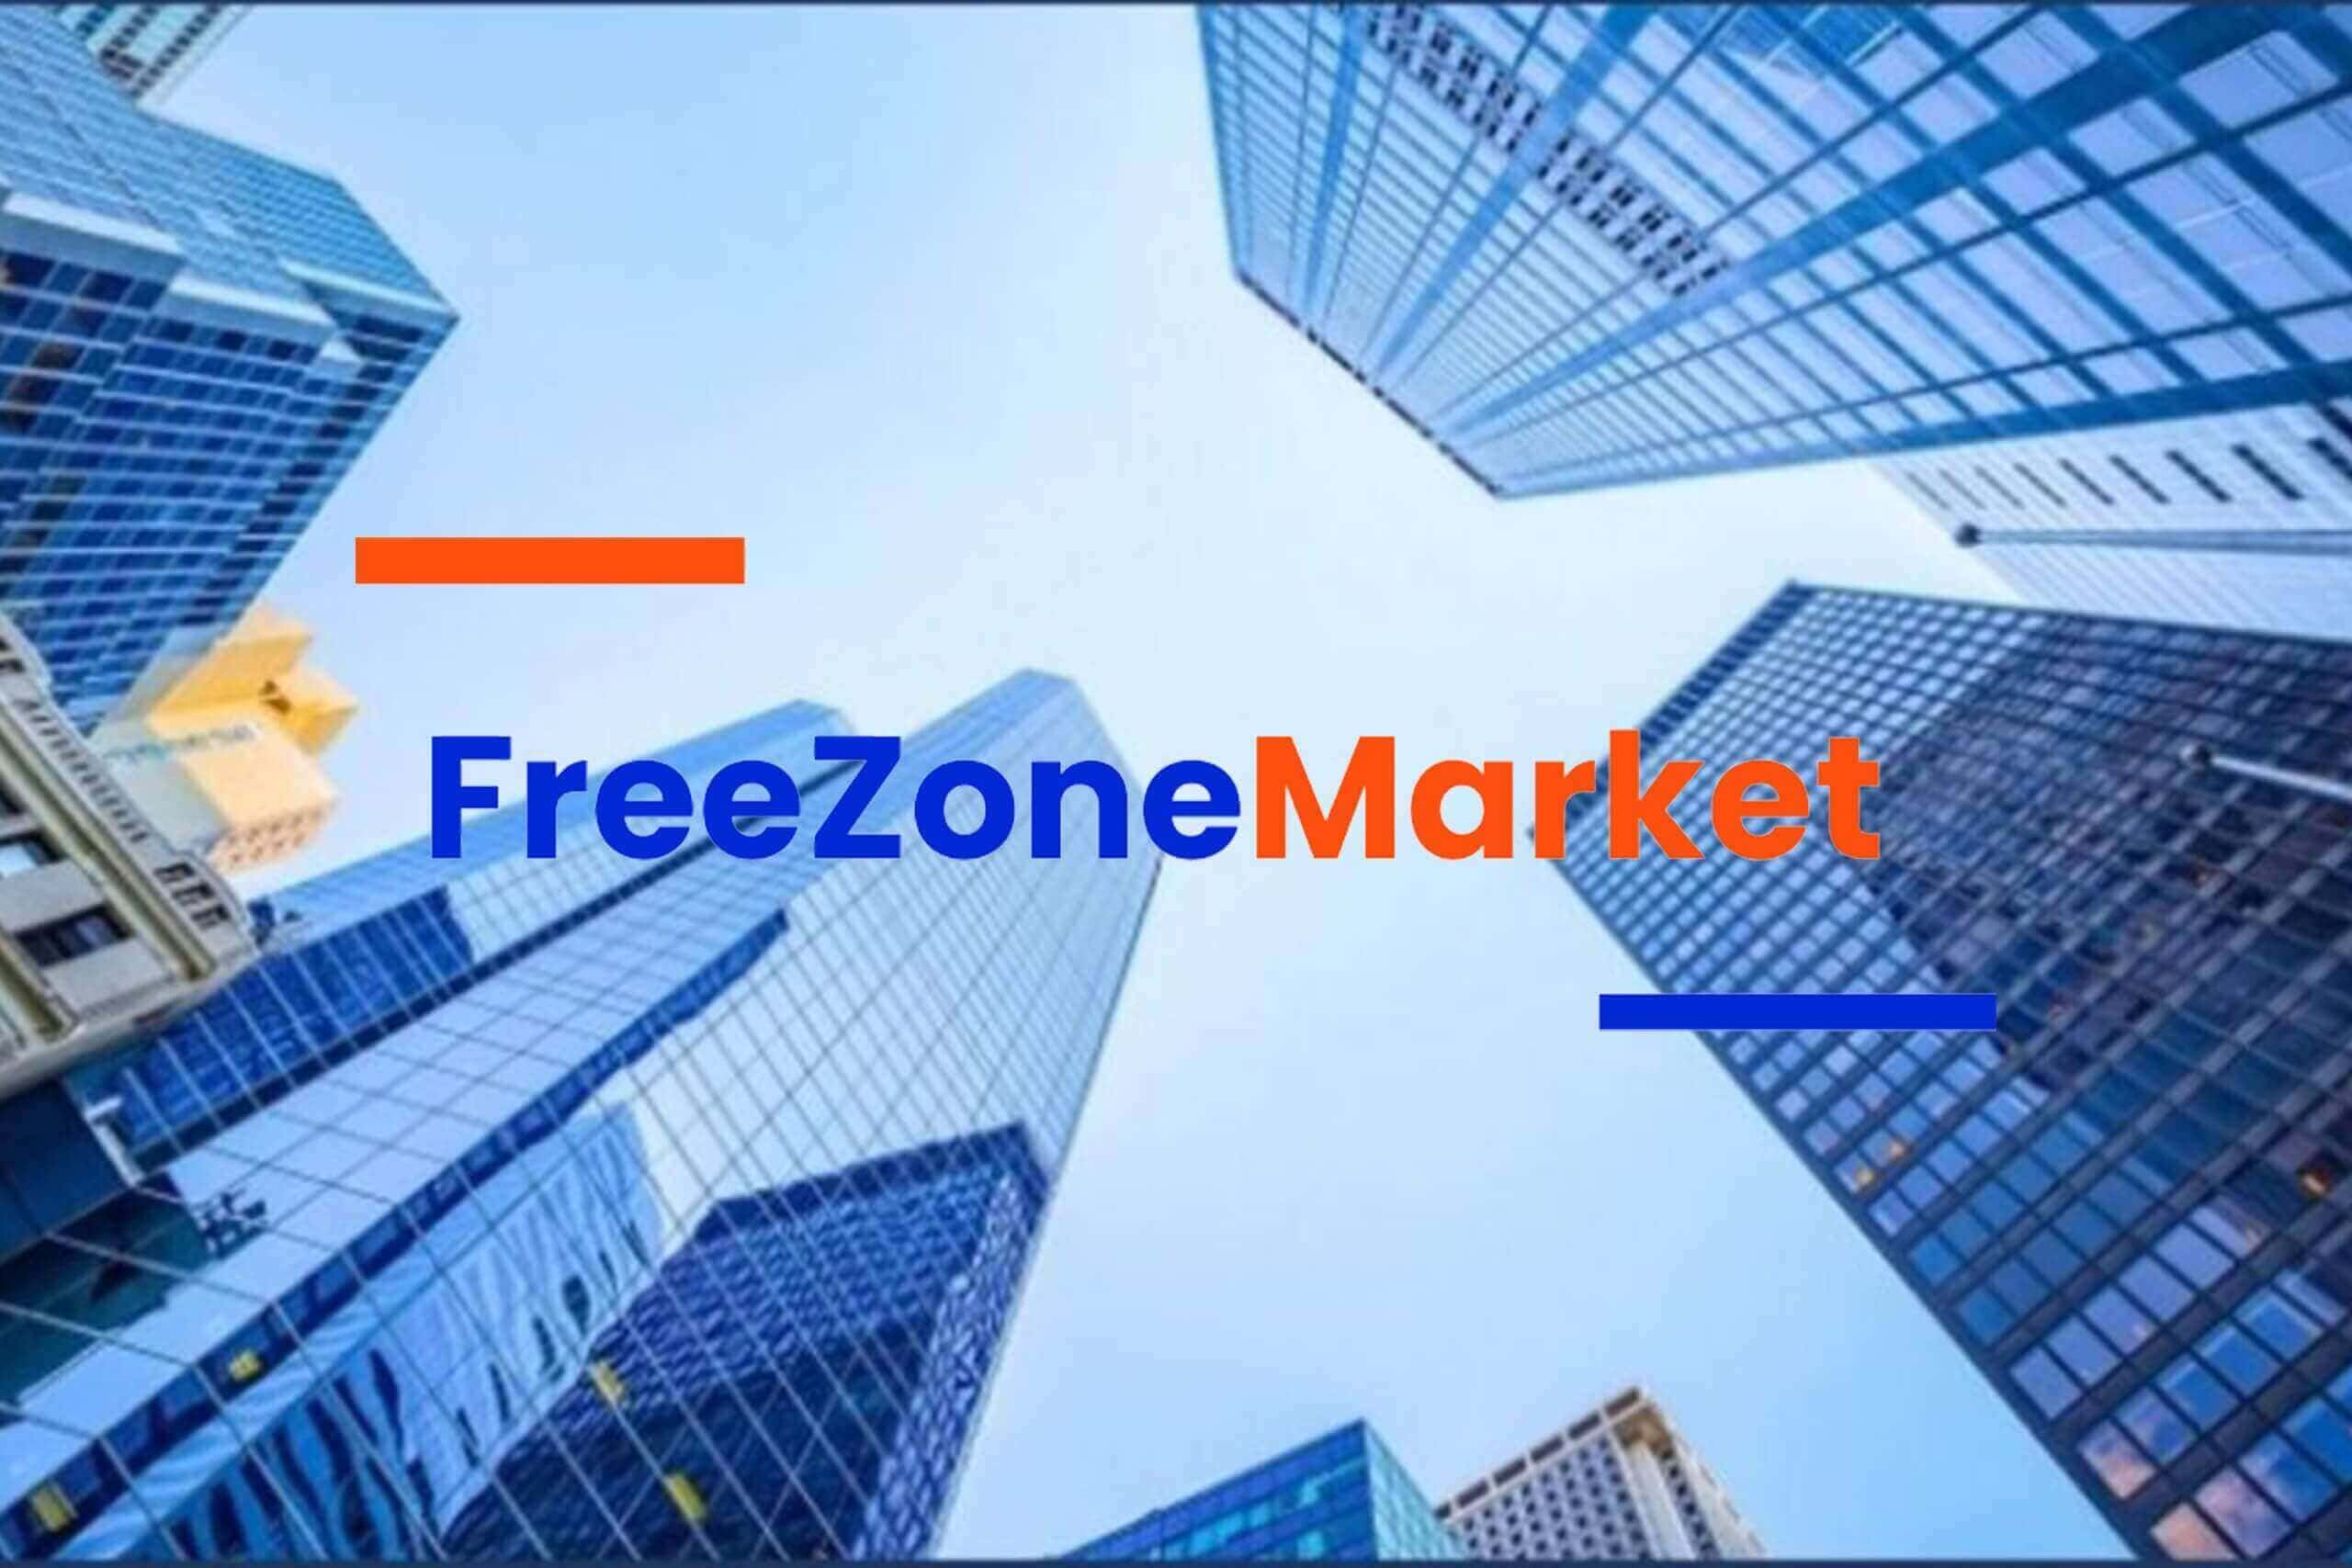 Reasons to choose FreeZoneMarket for your business